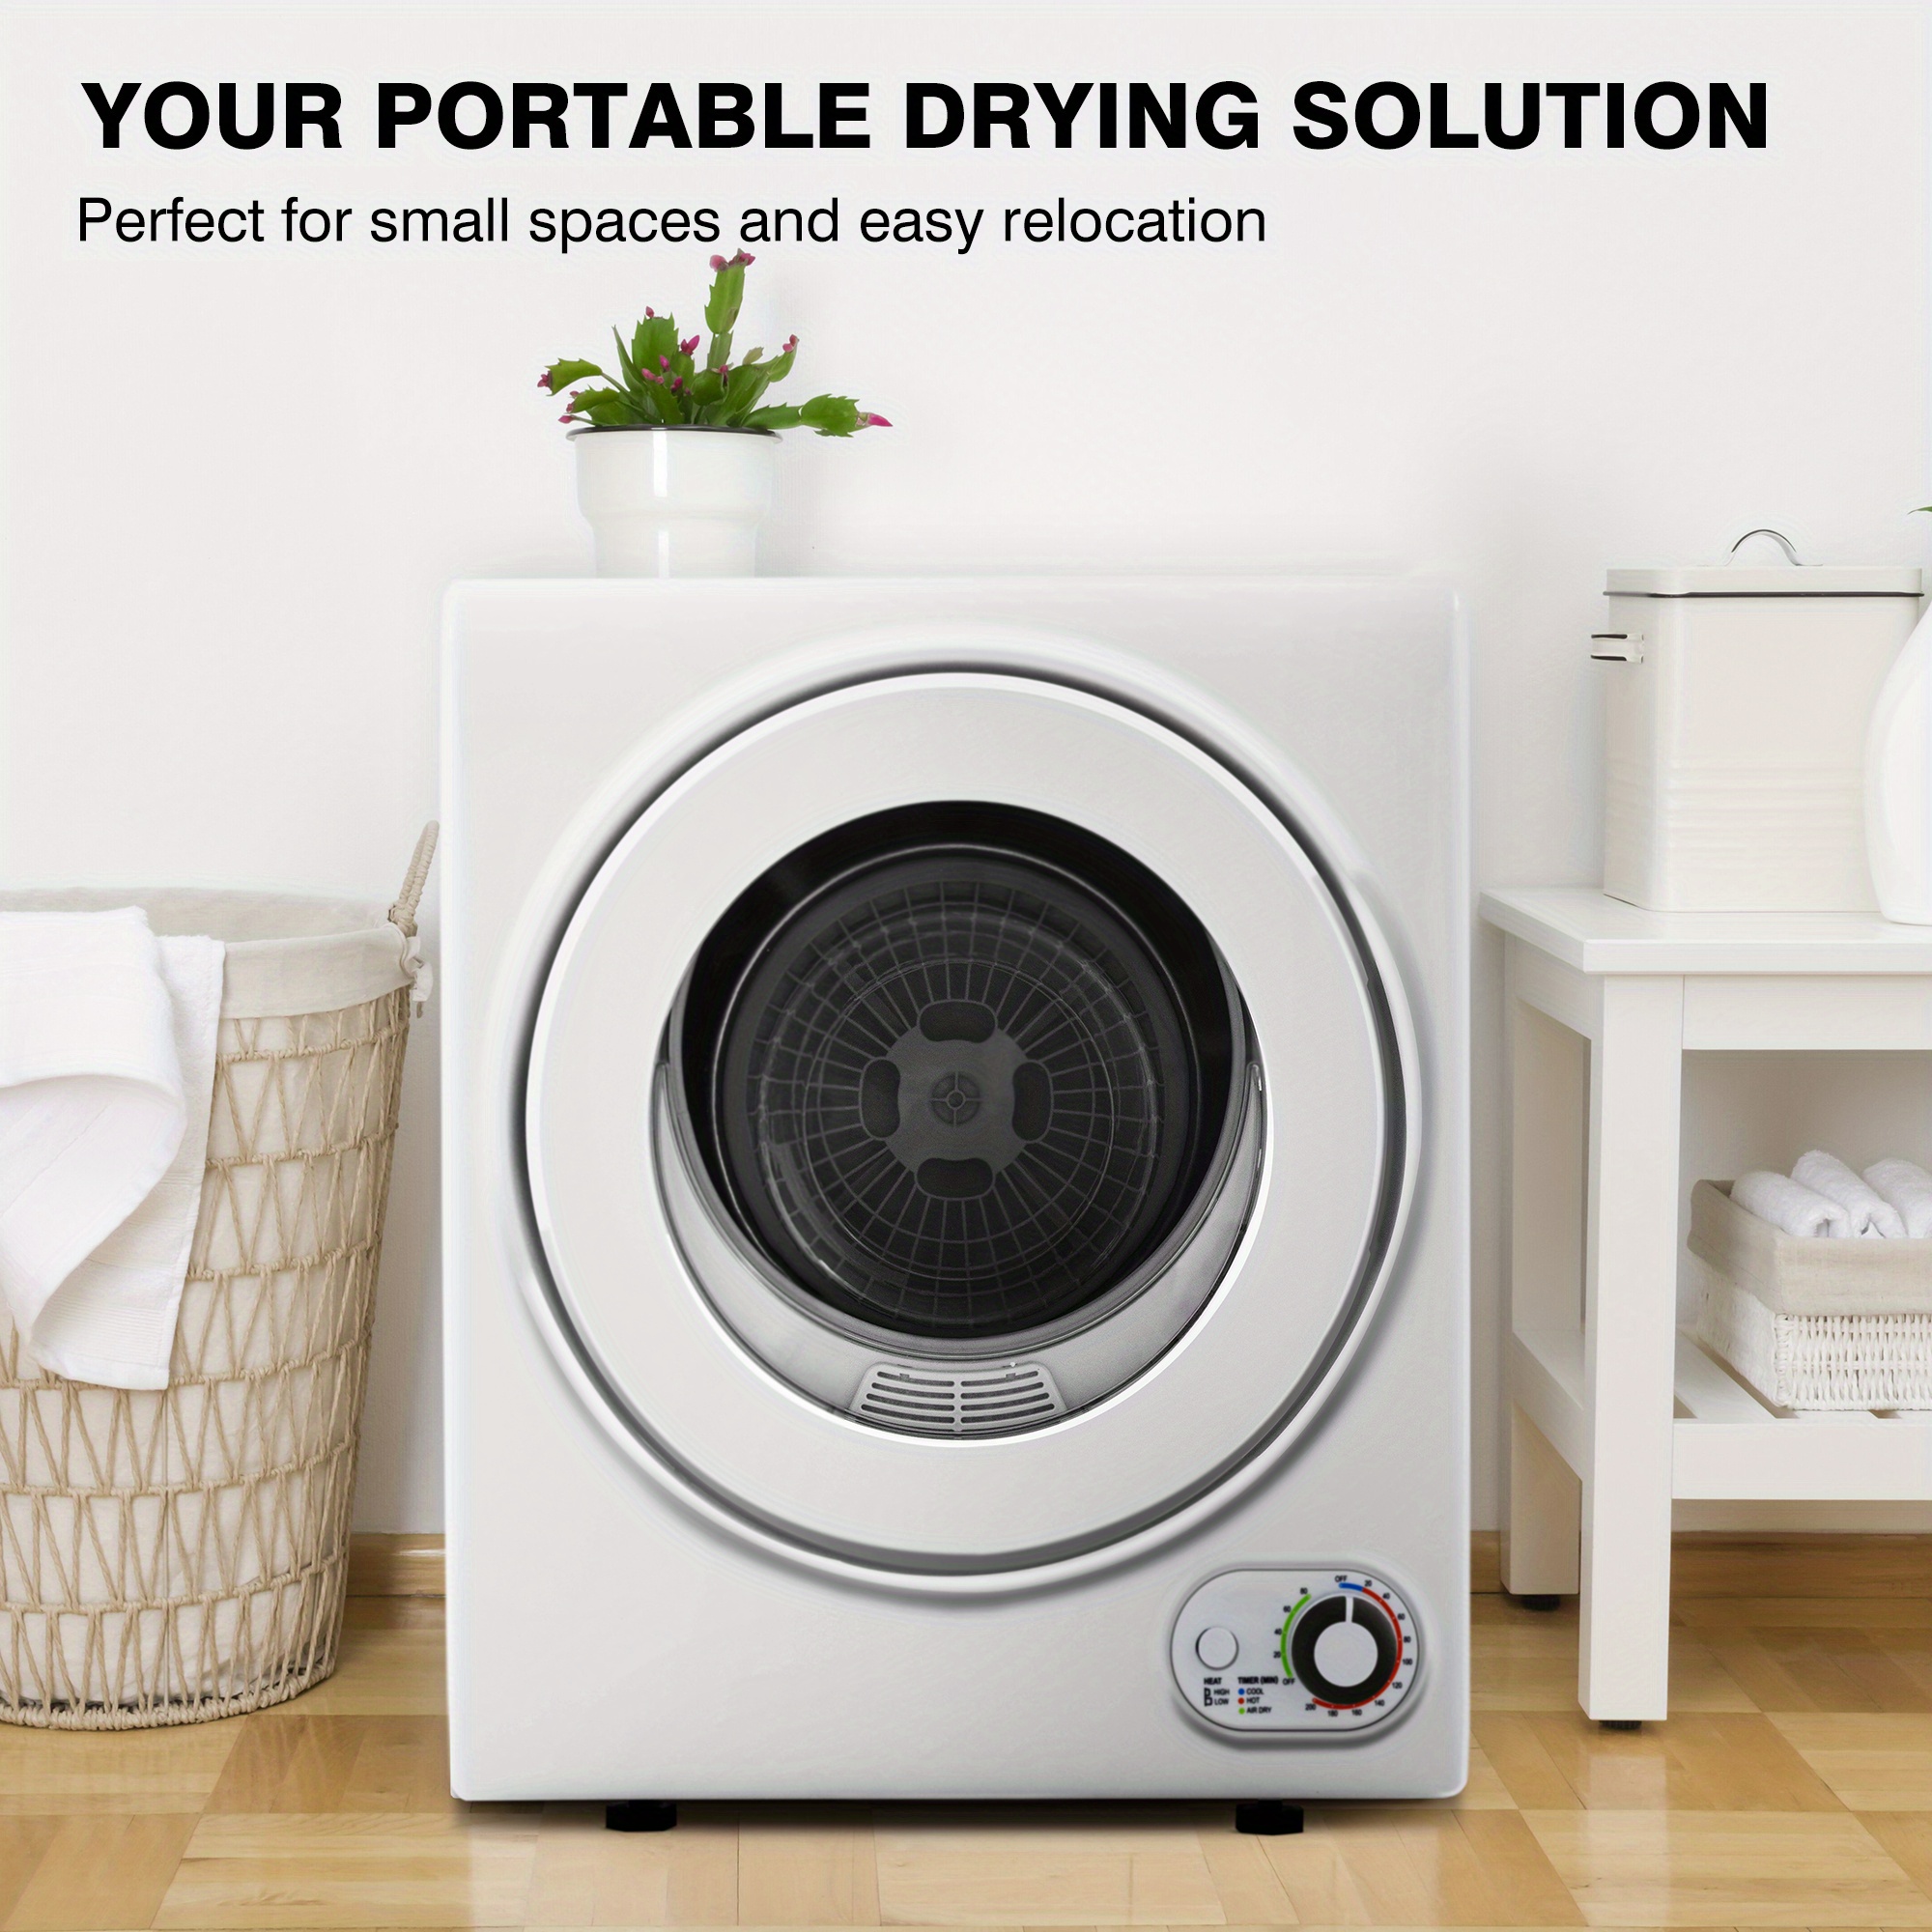 

110v Portable Clothes Dryer 850w Compact Laundry Dryers 1.5 Cu.ft Front Load Stainless Steel Electric Dryers Machine With Stainless Steel Tub For Apartment, Rvs, Dorms, White Easy Control